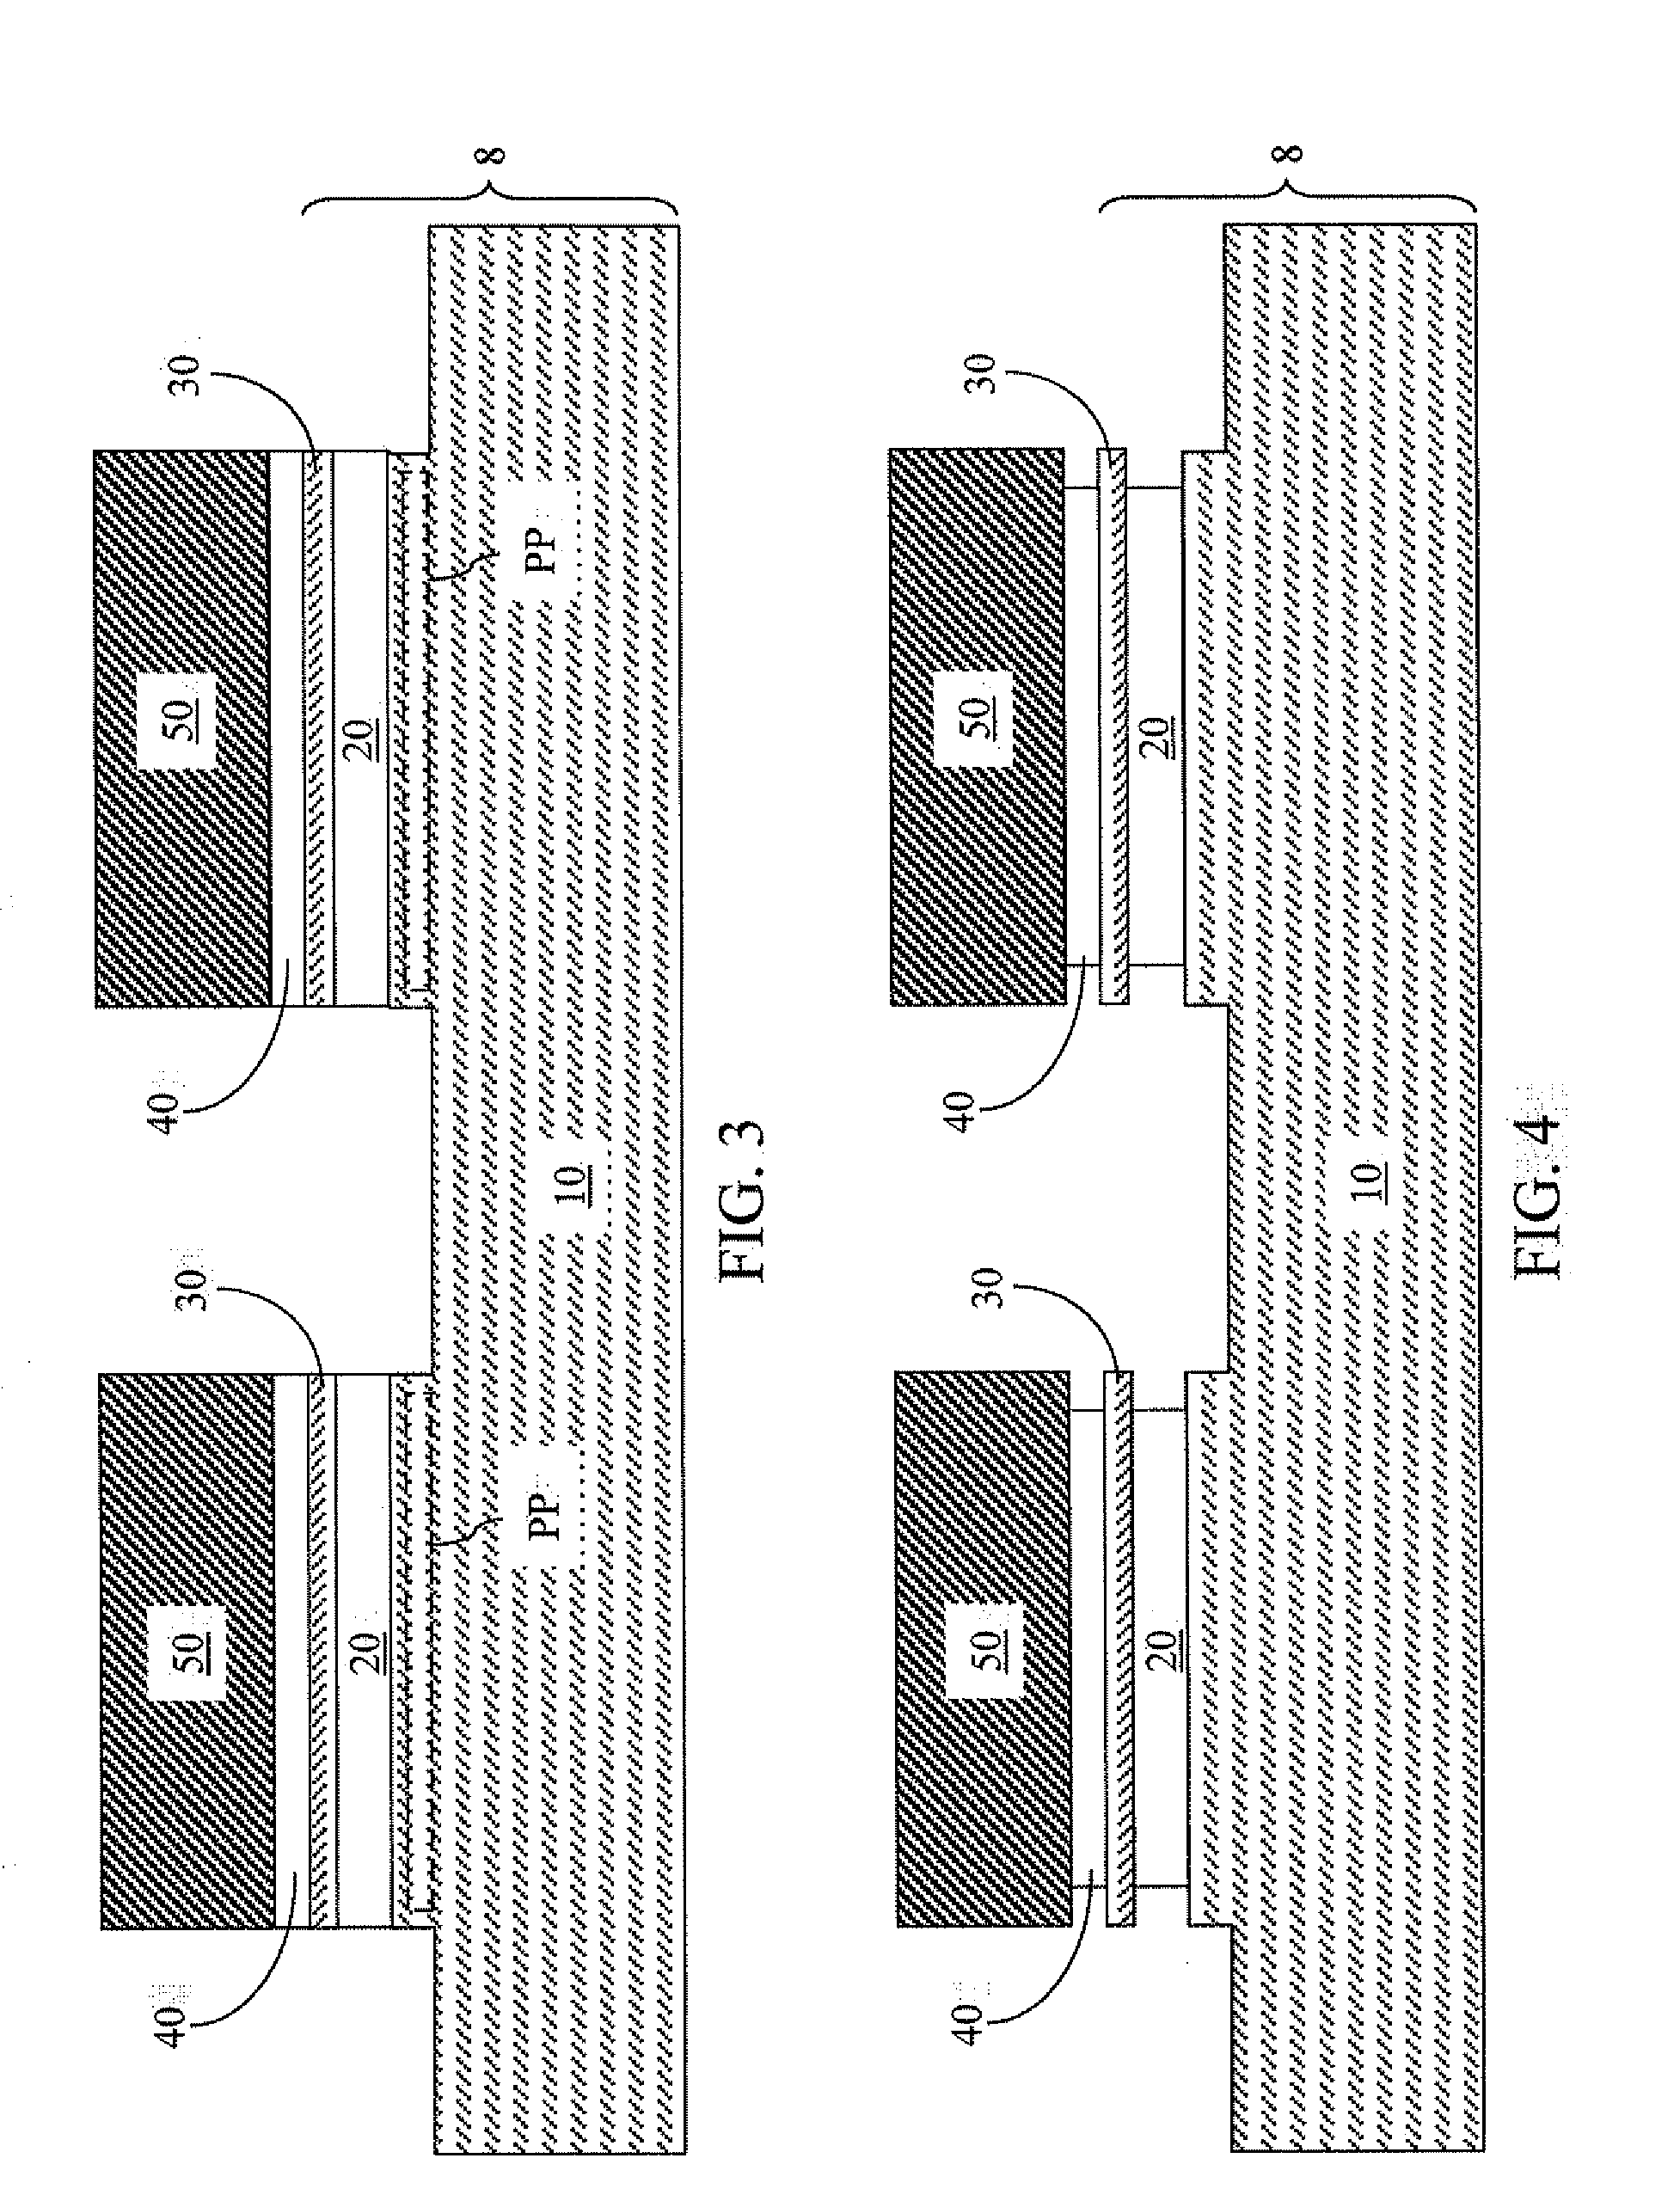 Isolation structures for soi devices with ultrathin soi and ultrathin box